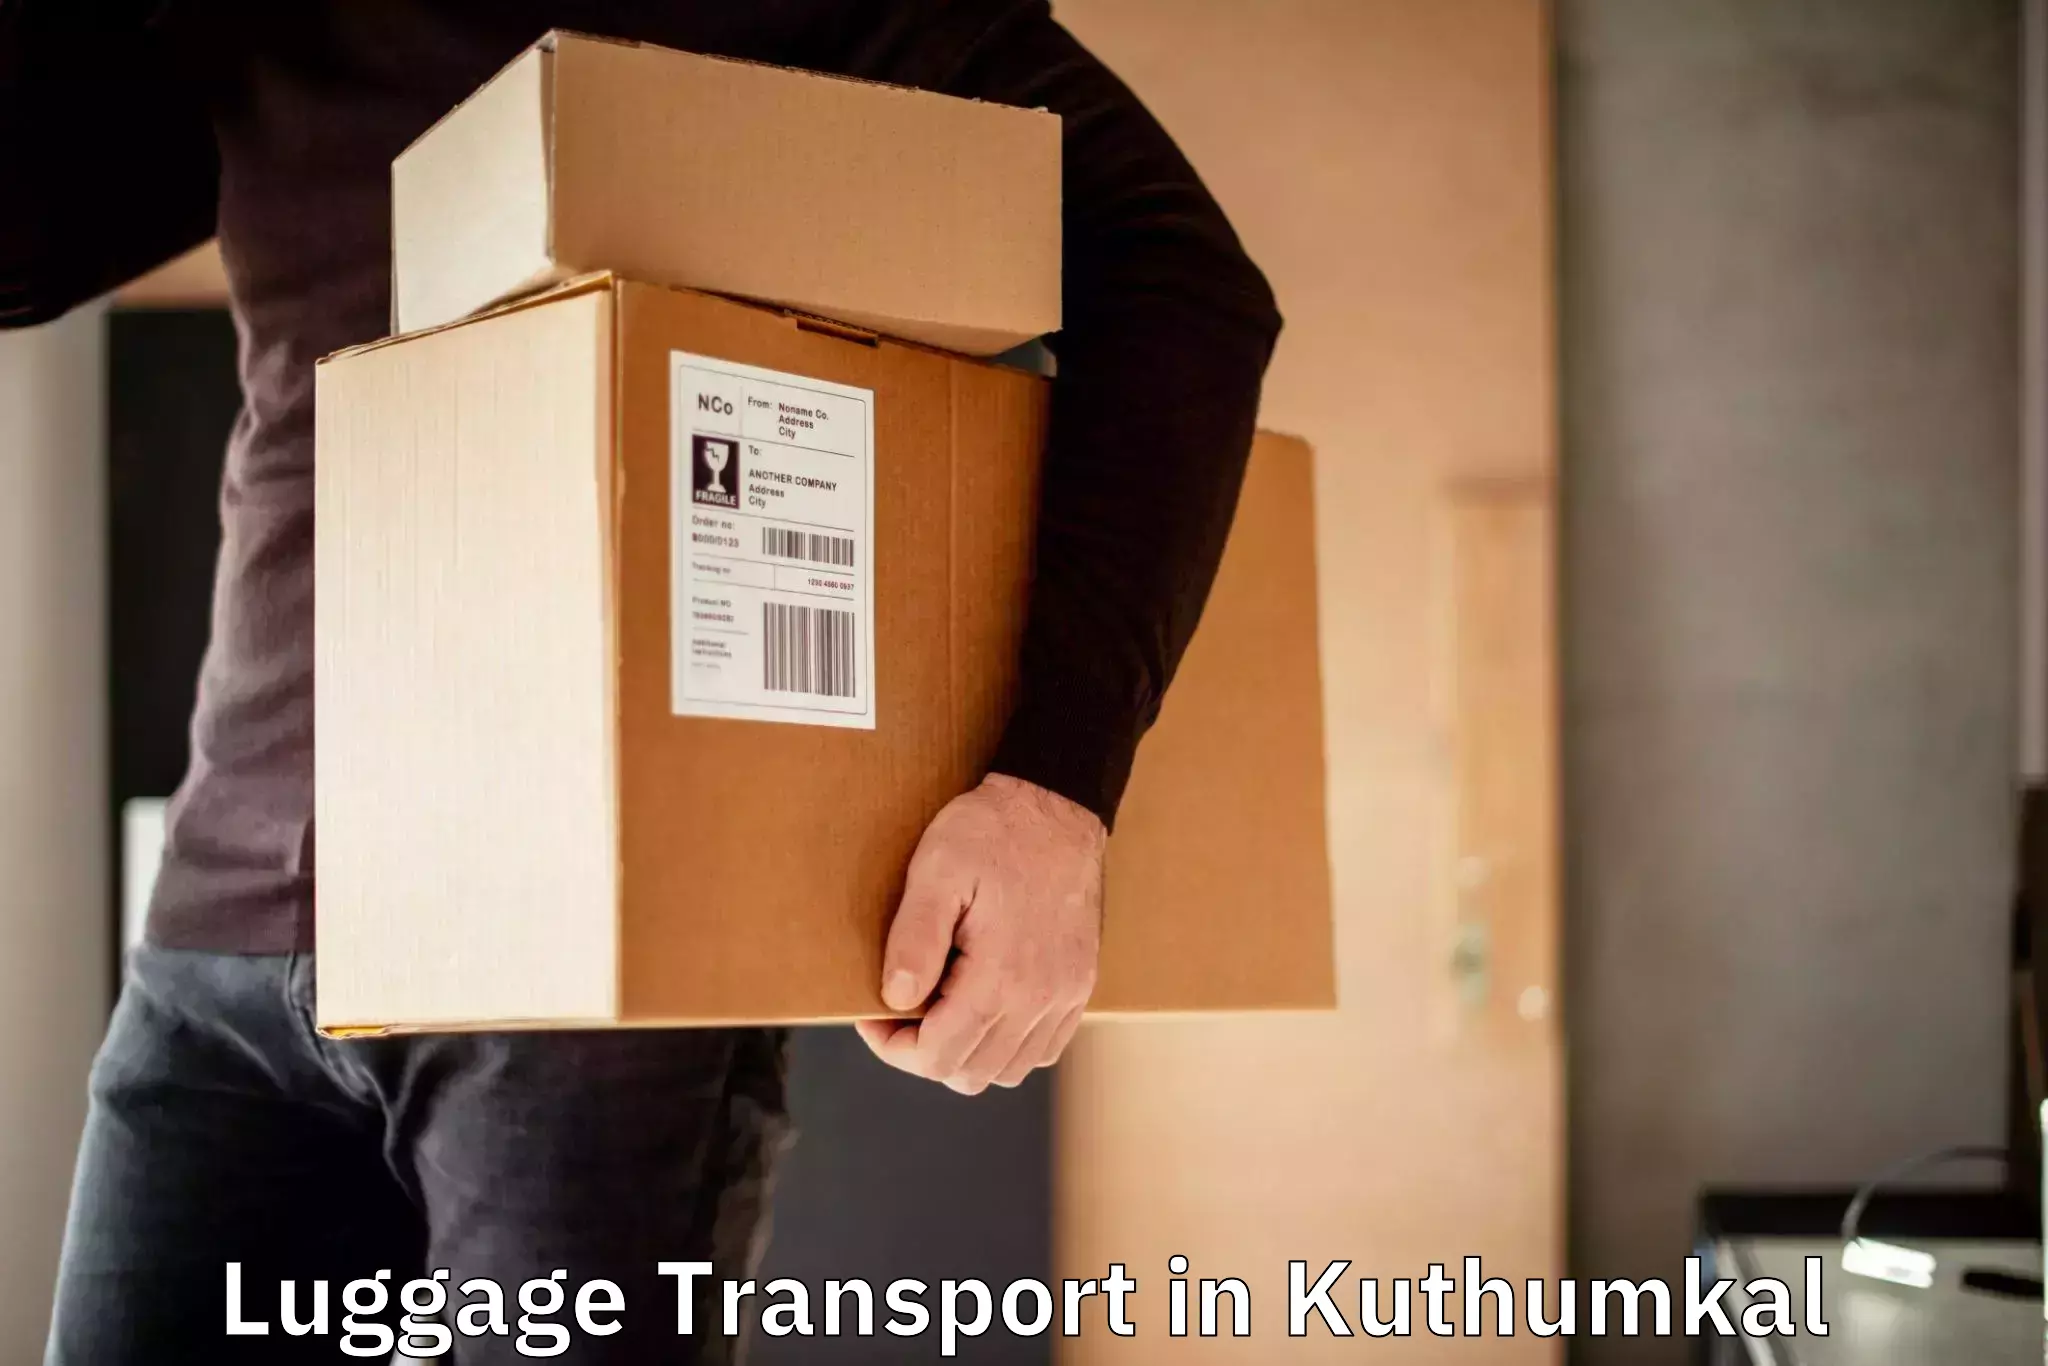 Luggage transport deals in Kuthumkal